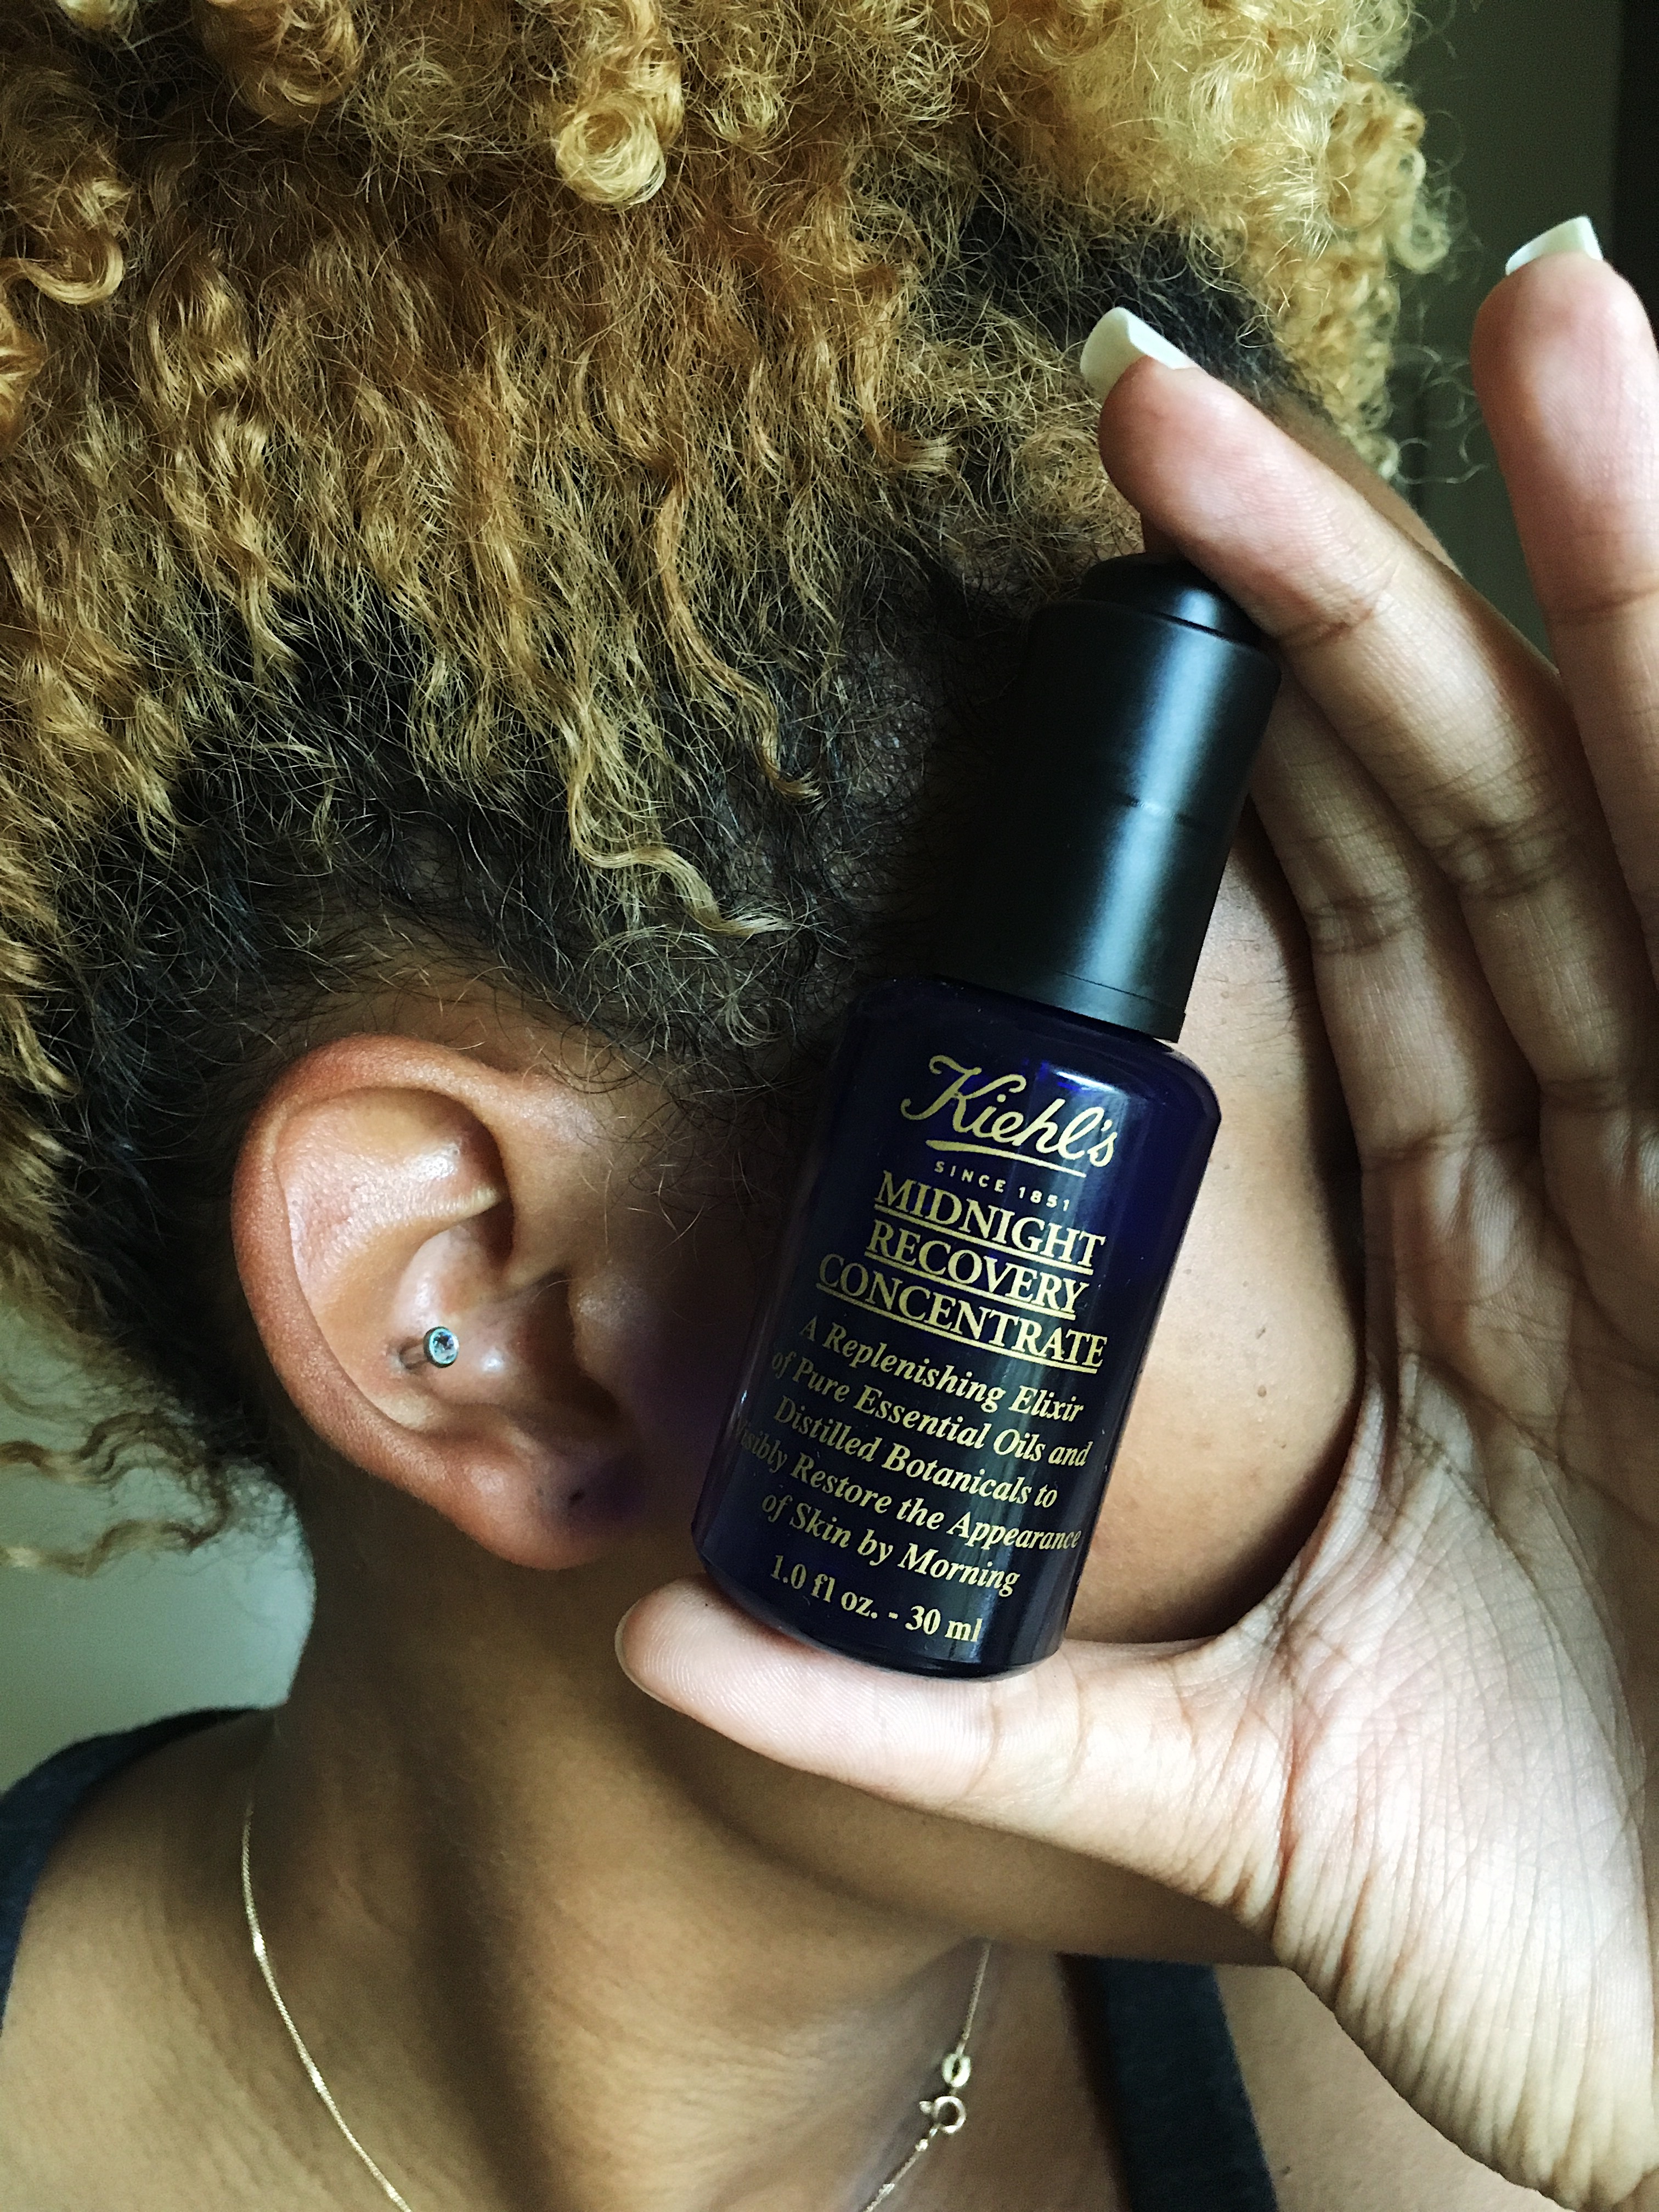 kiehls oil-facial oil-midnight recovery concentrate